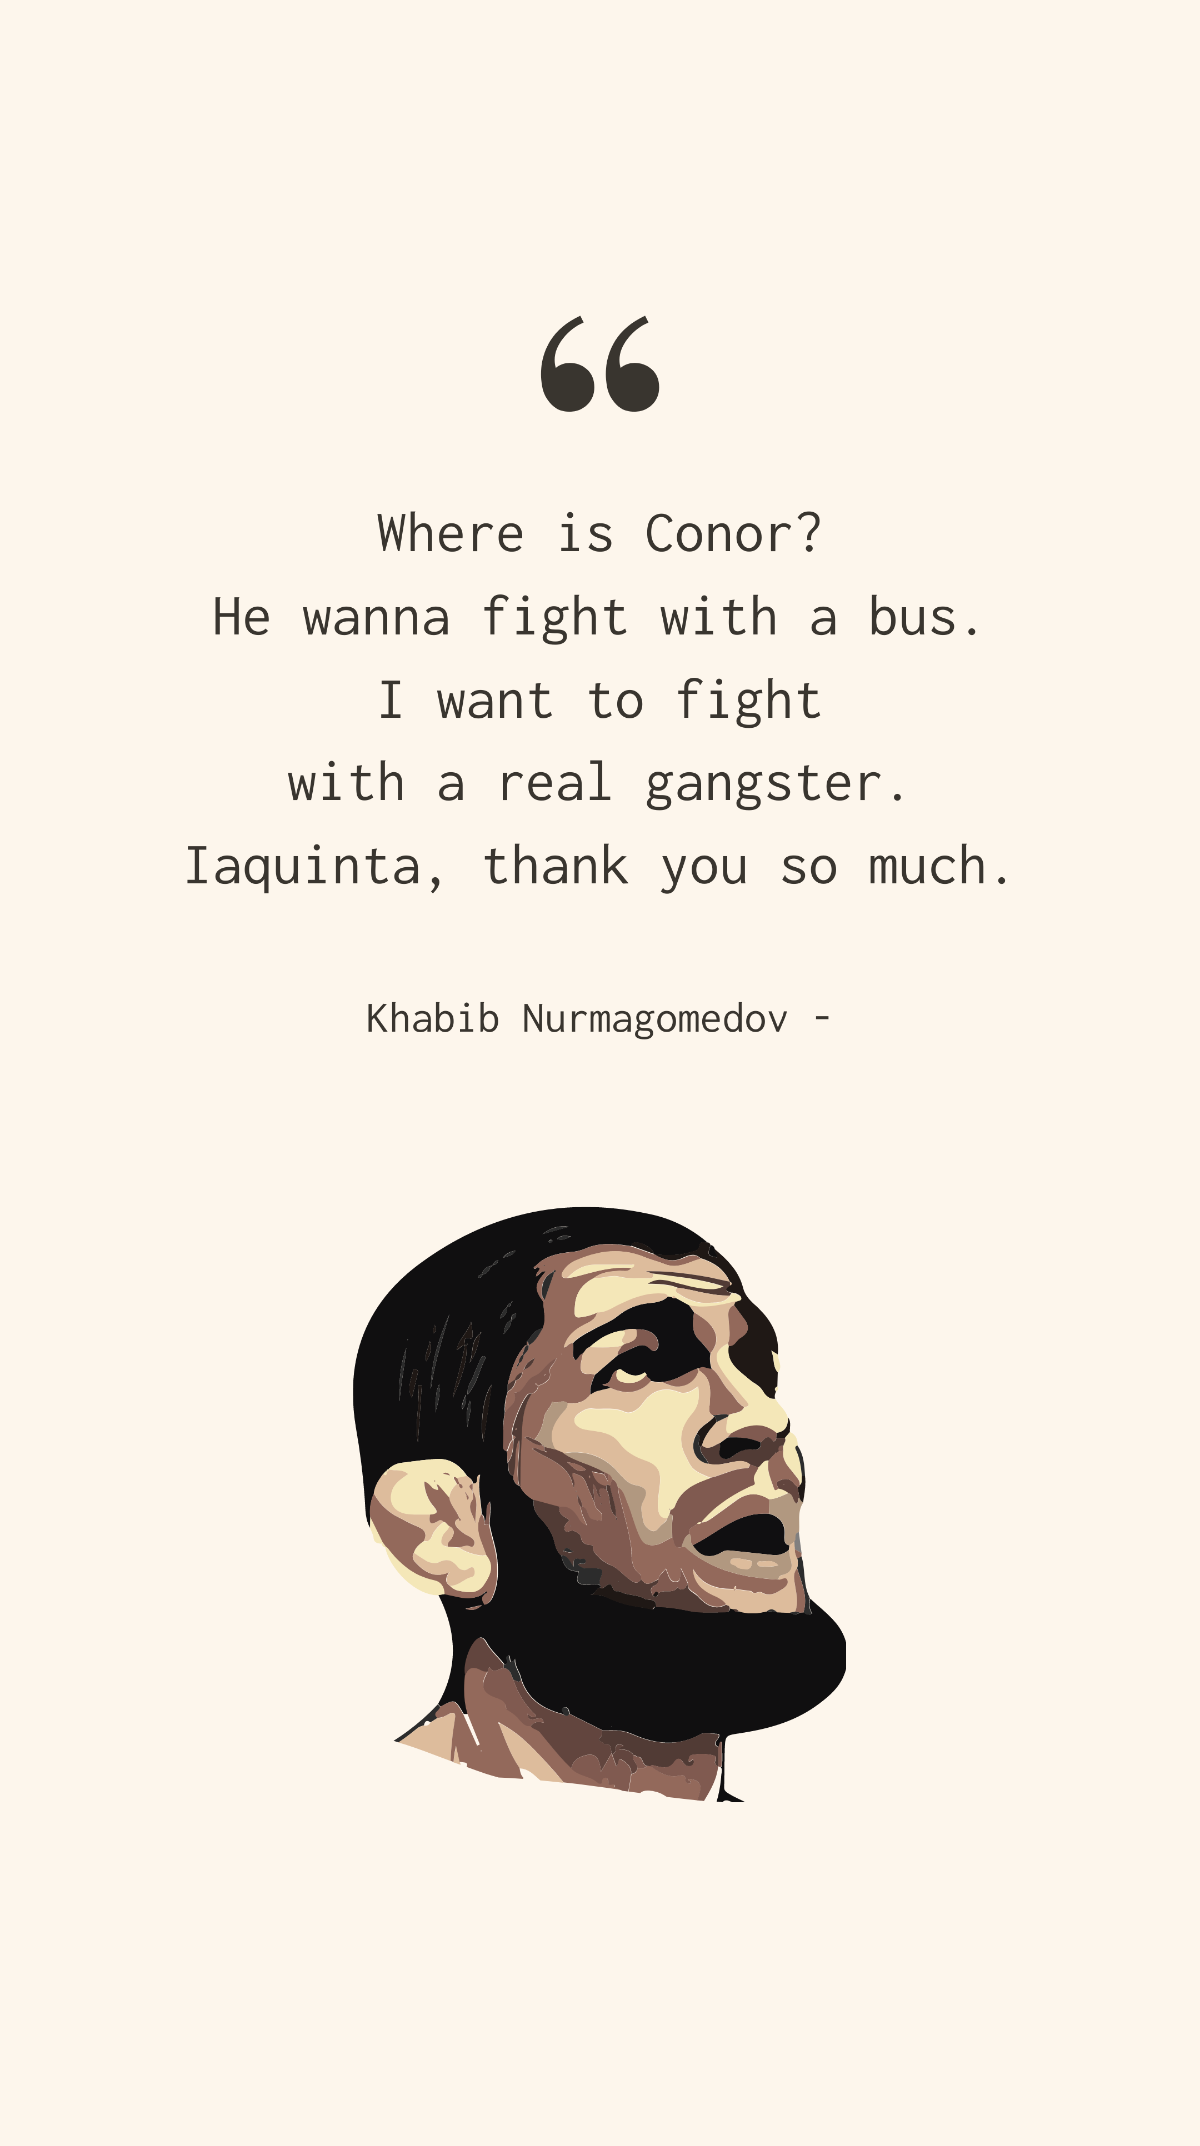 Khabib Nurmagomedov - Where is Conor? He wanna fight with a bus. I want to fight with a real gangster. Iaquinta, thank you so much. Template